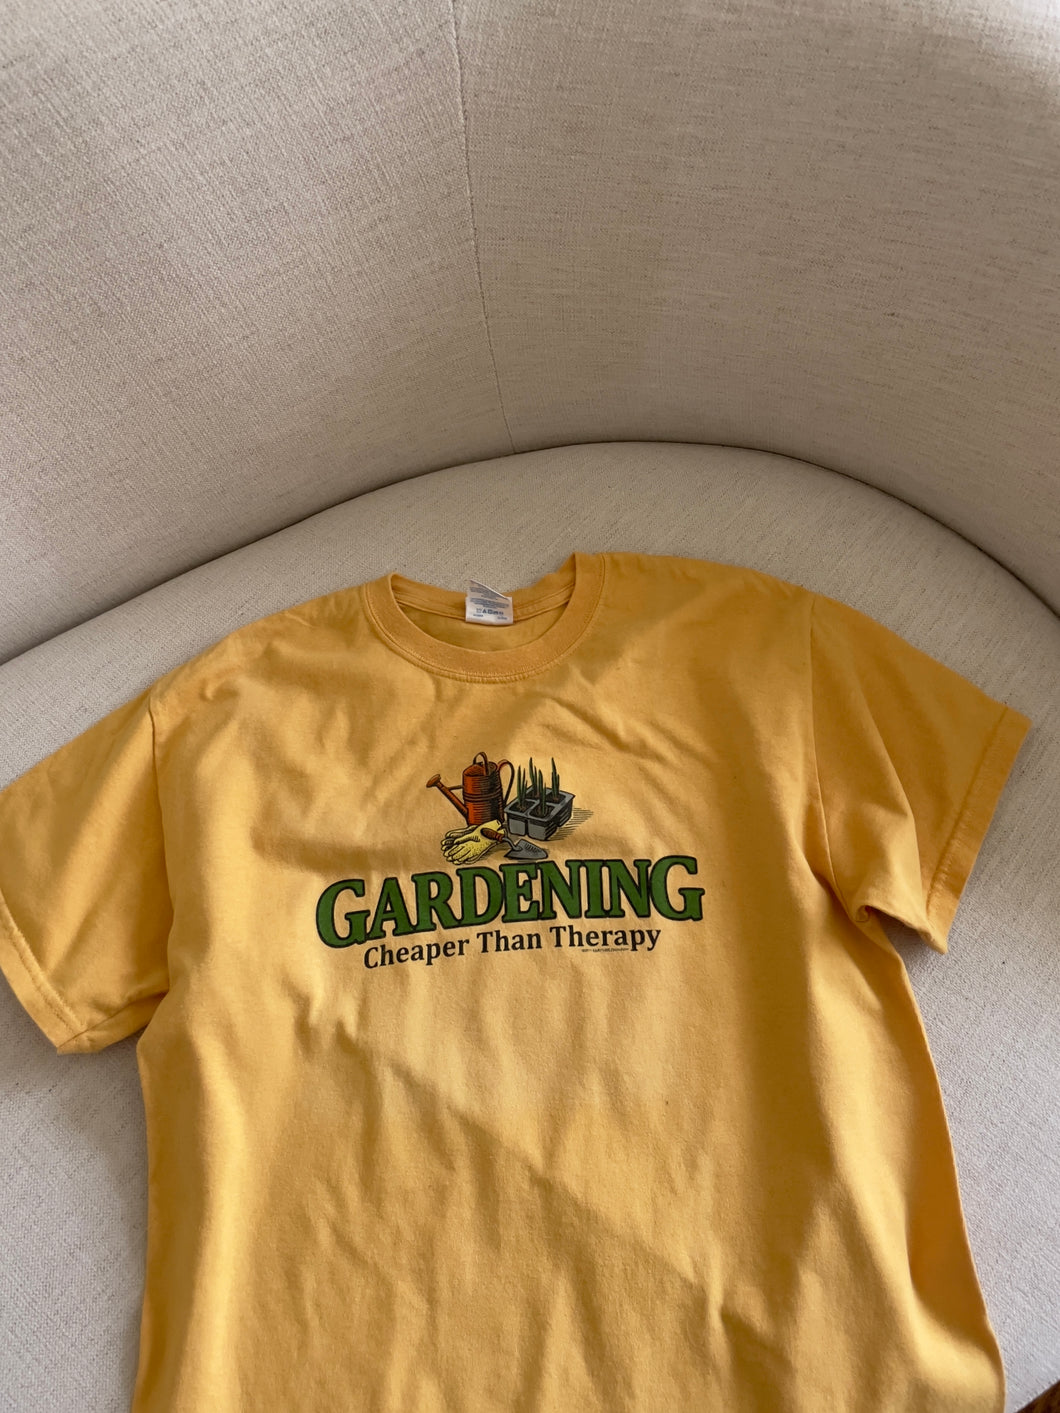 gardening + therapy tee